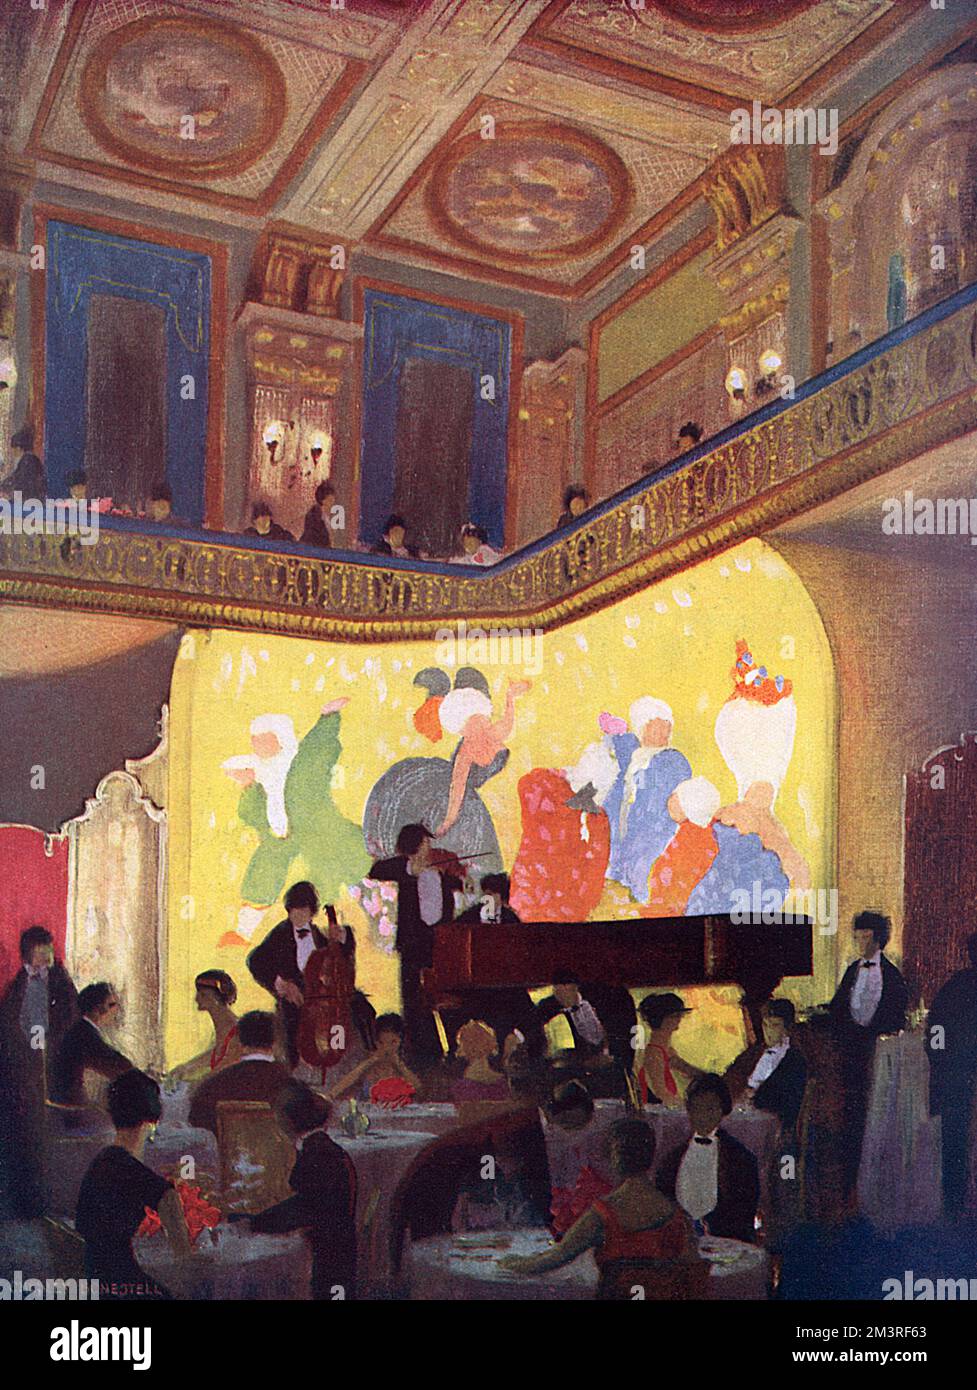 View of the interior of the Trocadero in London, with diners at tables and a band playing against a mural.       Date: 1925 Stock Photo